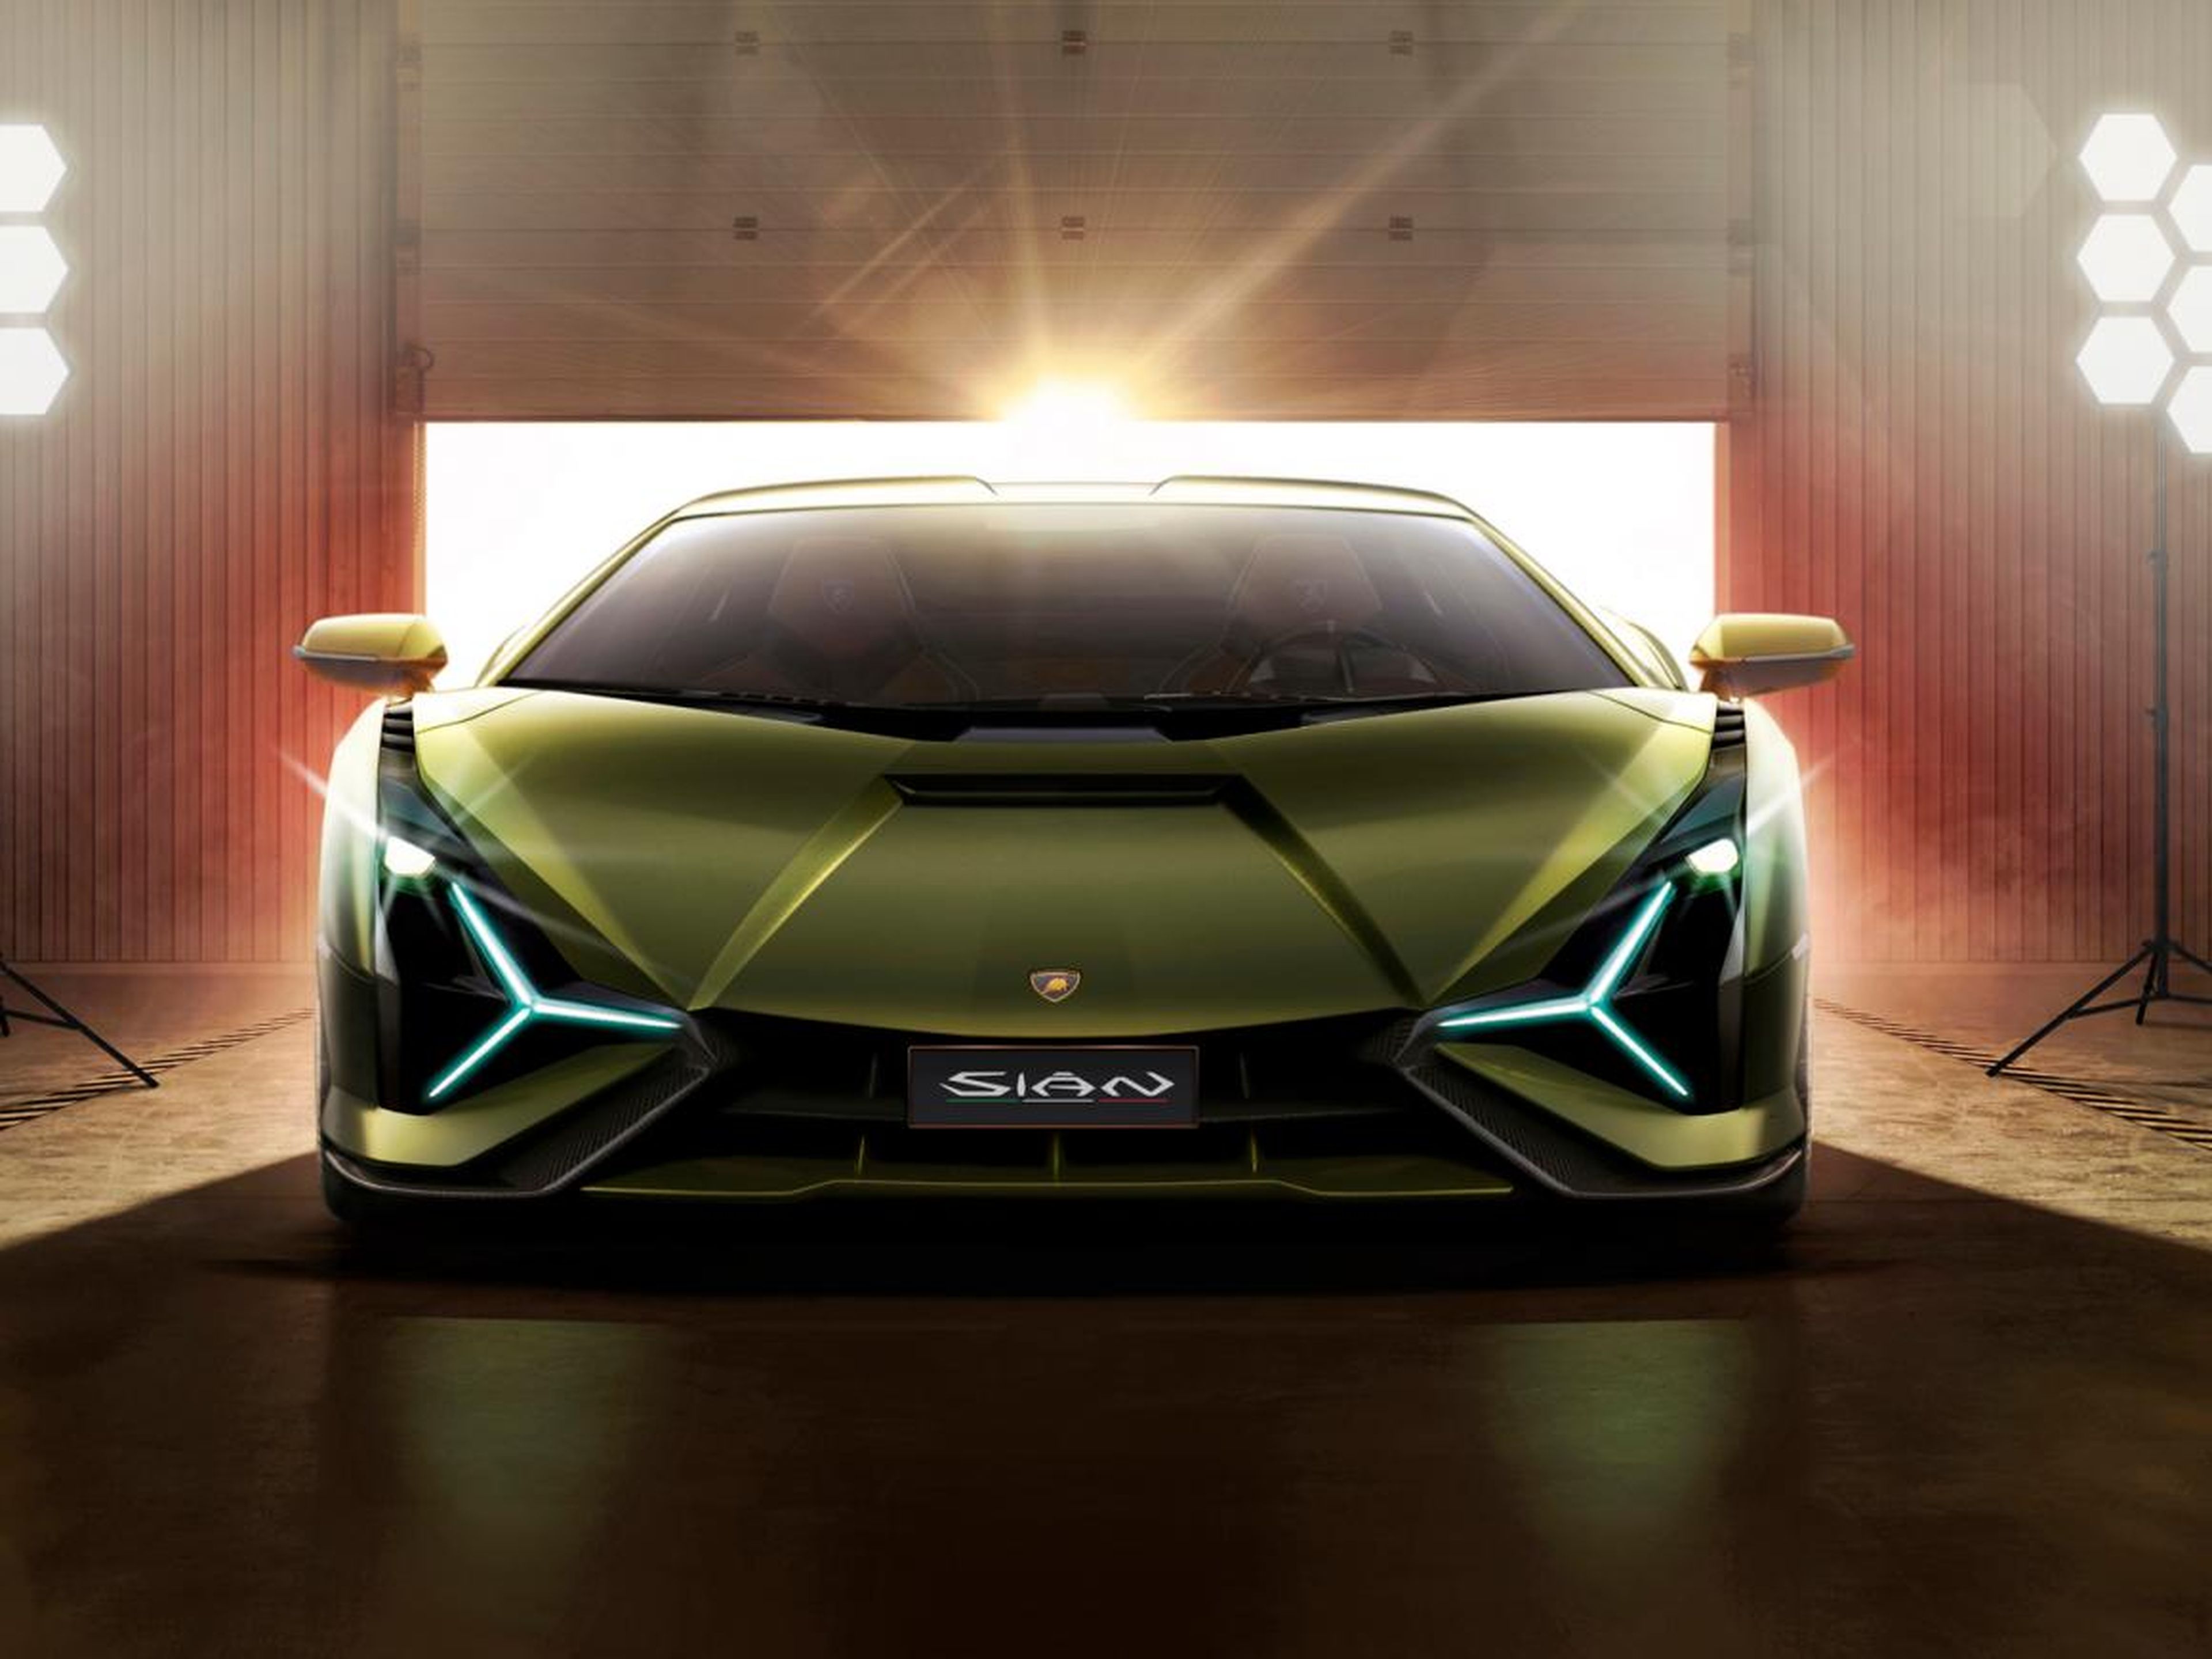 “Not only does the Sián deliver a formidable hyper-car design and engineering tour de force today, it augments the potential for Lamborghini as a super sports car brand for tomorrow and for decades to come, even as hybridization